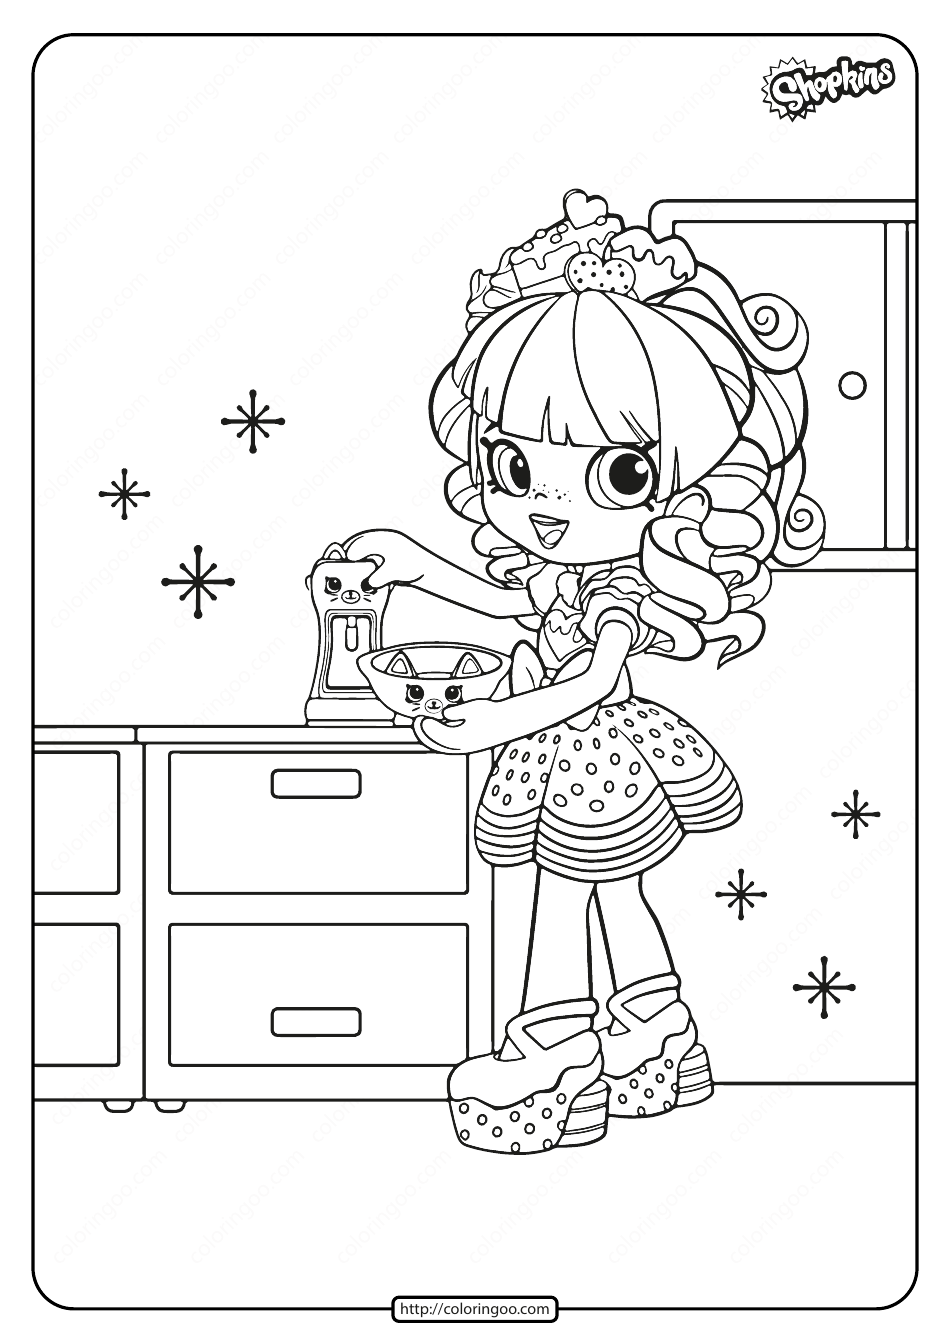 Rainbow Kate Coloring Page, Page 1